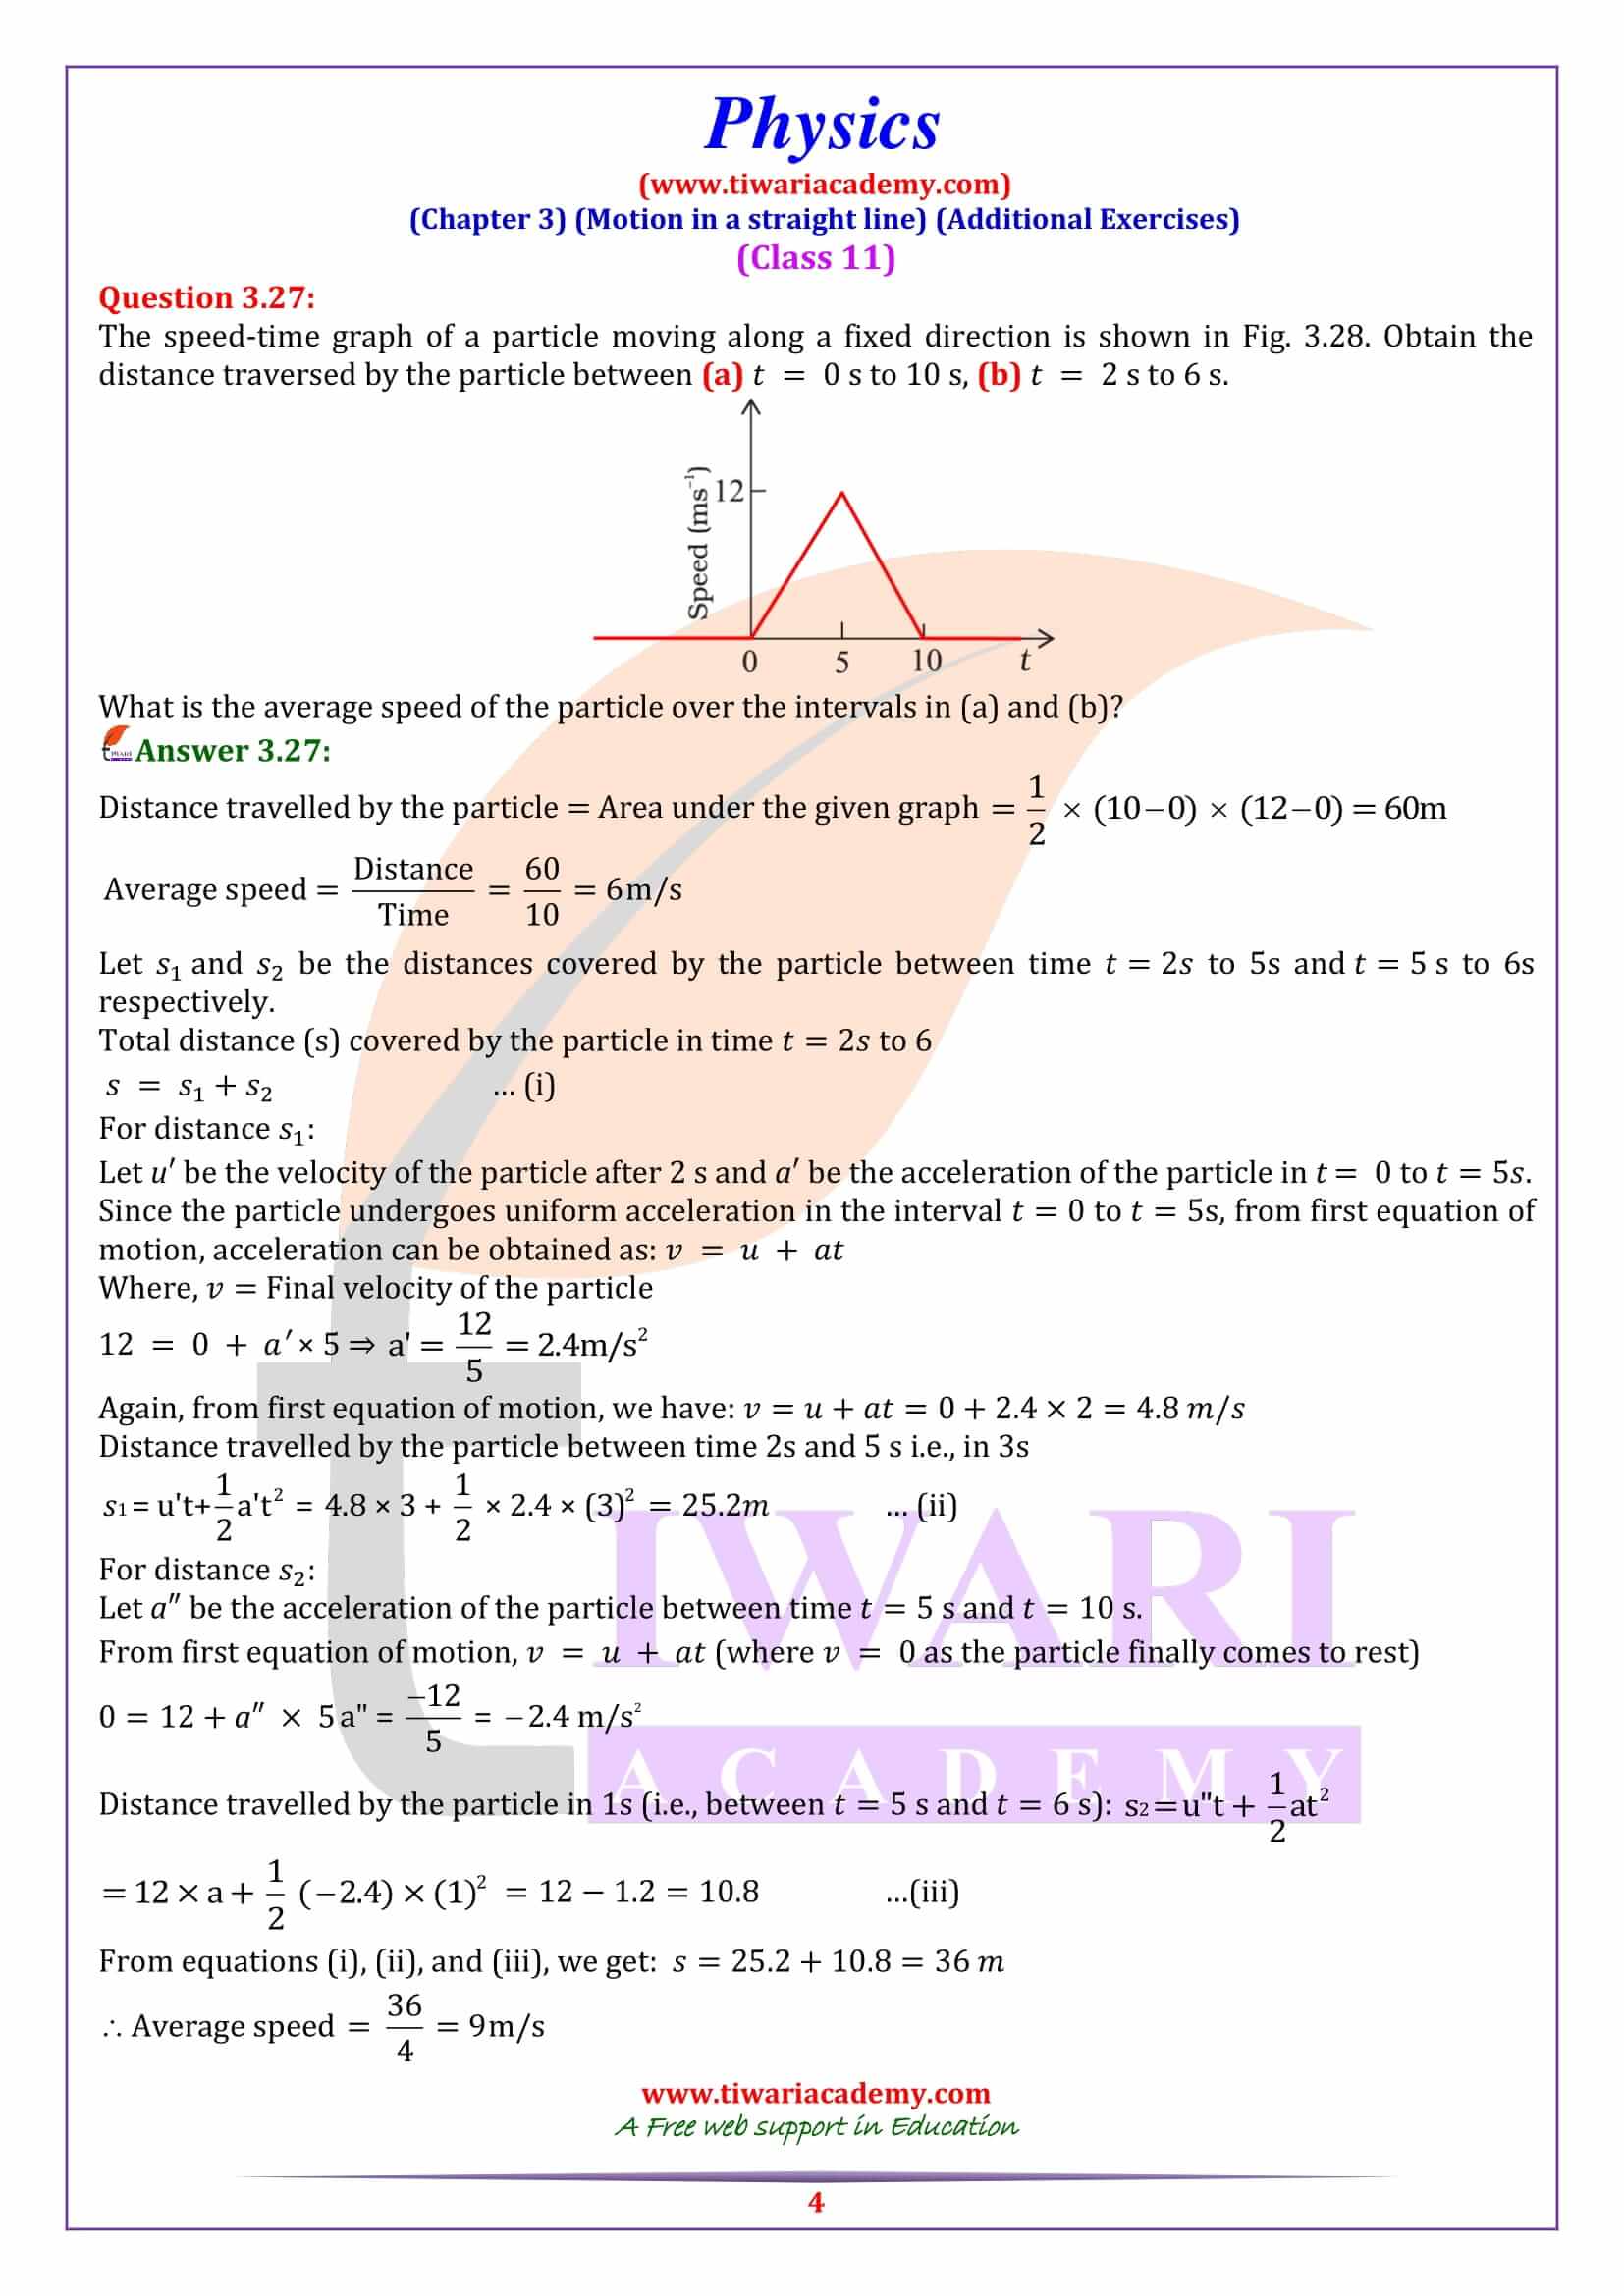 NCERT Solutions for Class 11 Physics Chapter 3 Additonal in English